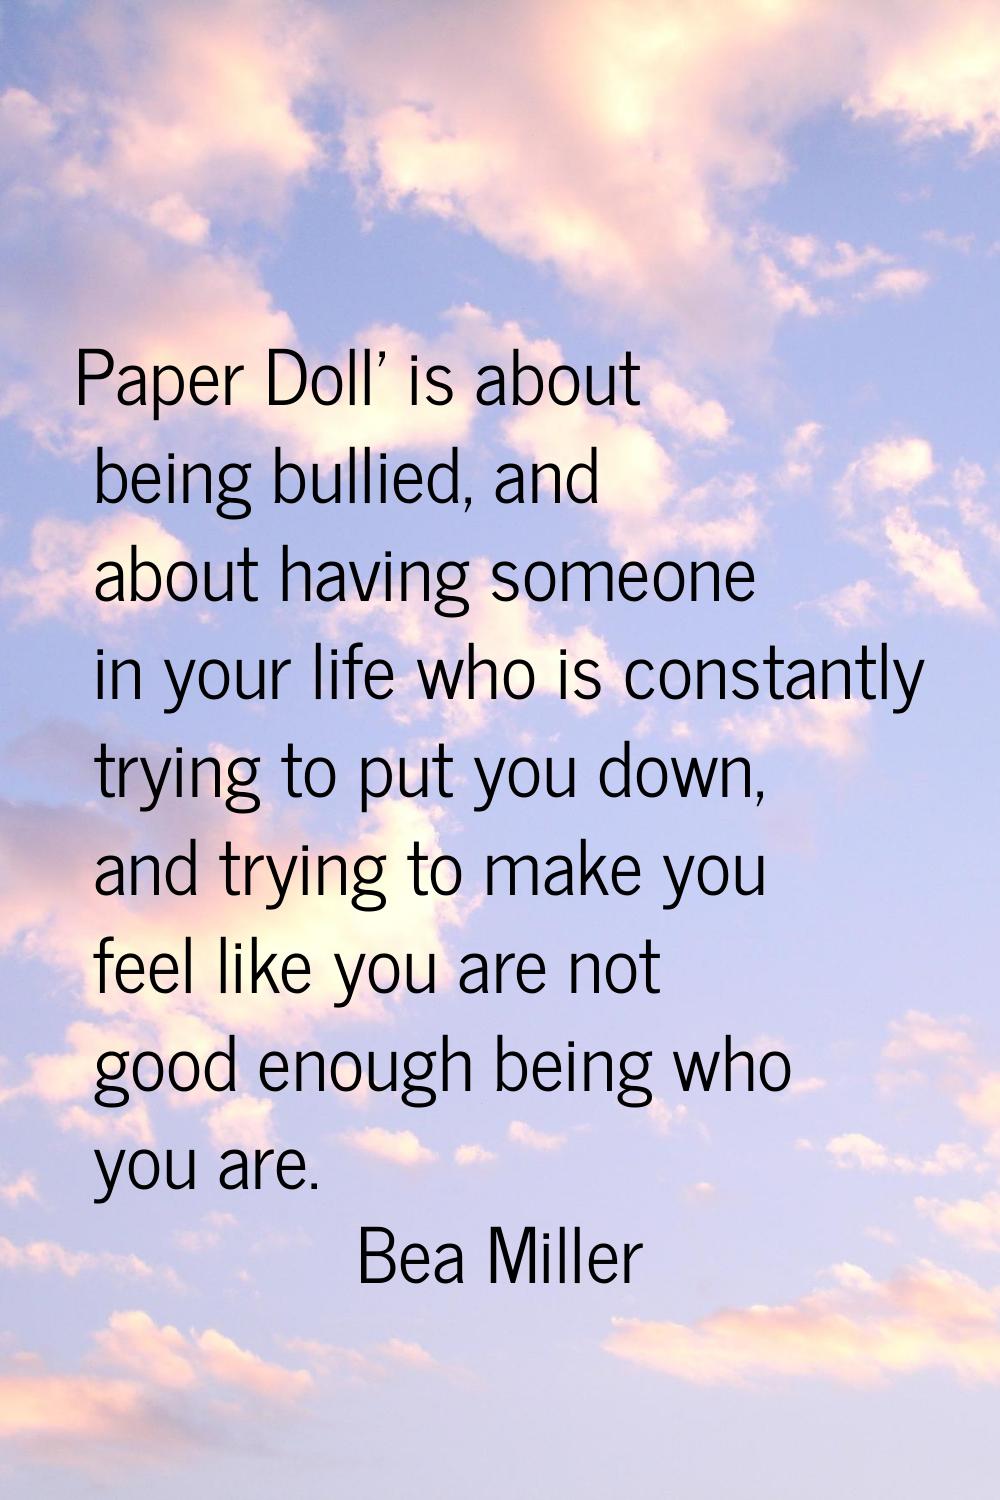 Paper Doll' is about being bullied, and about having someone in your life who is constantly trying 